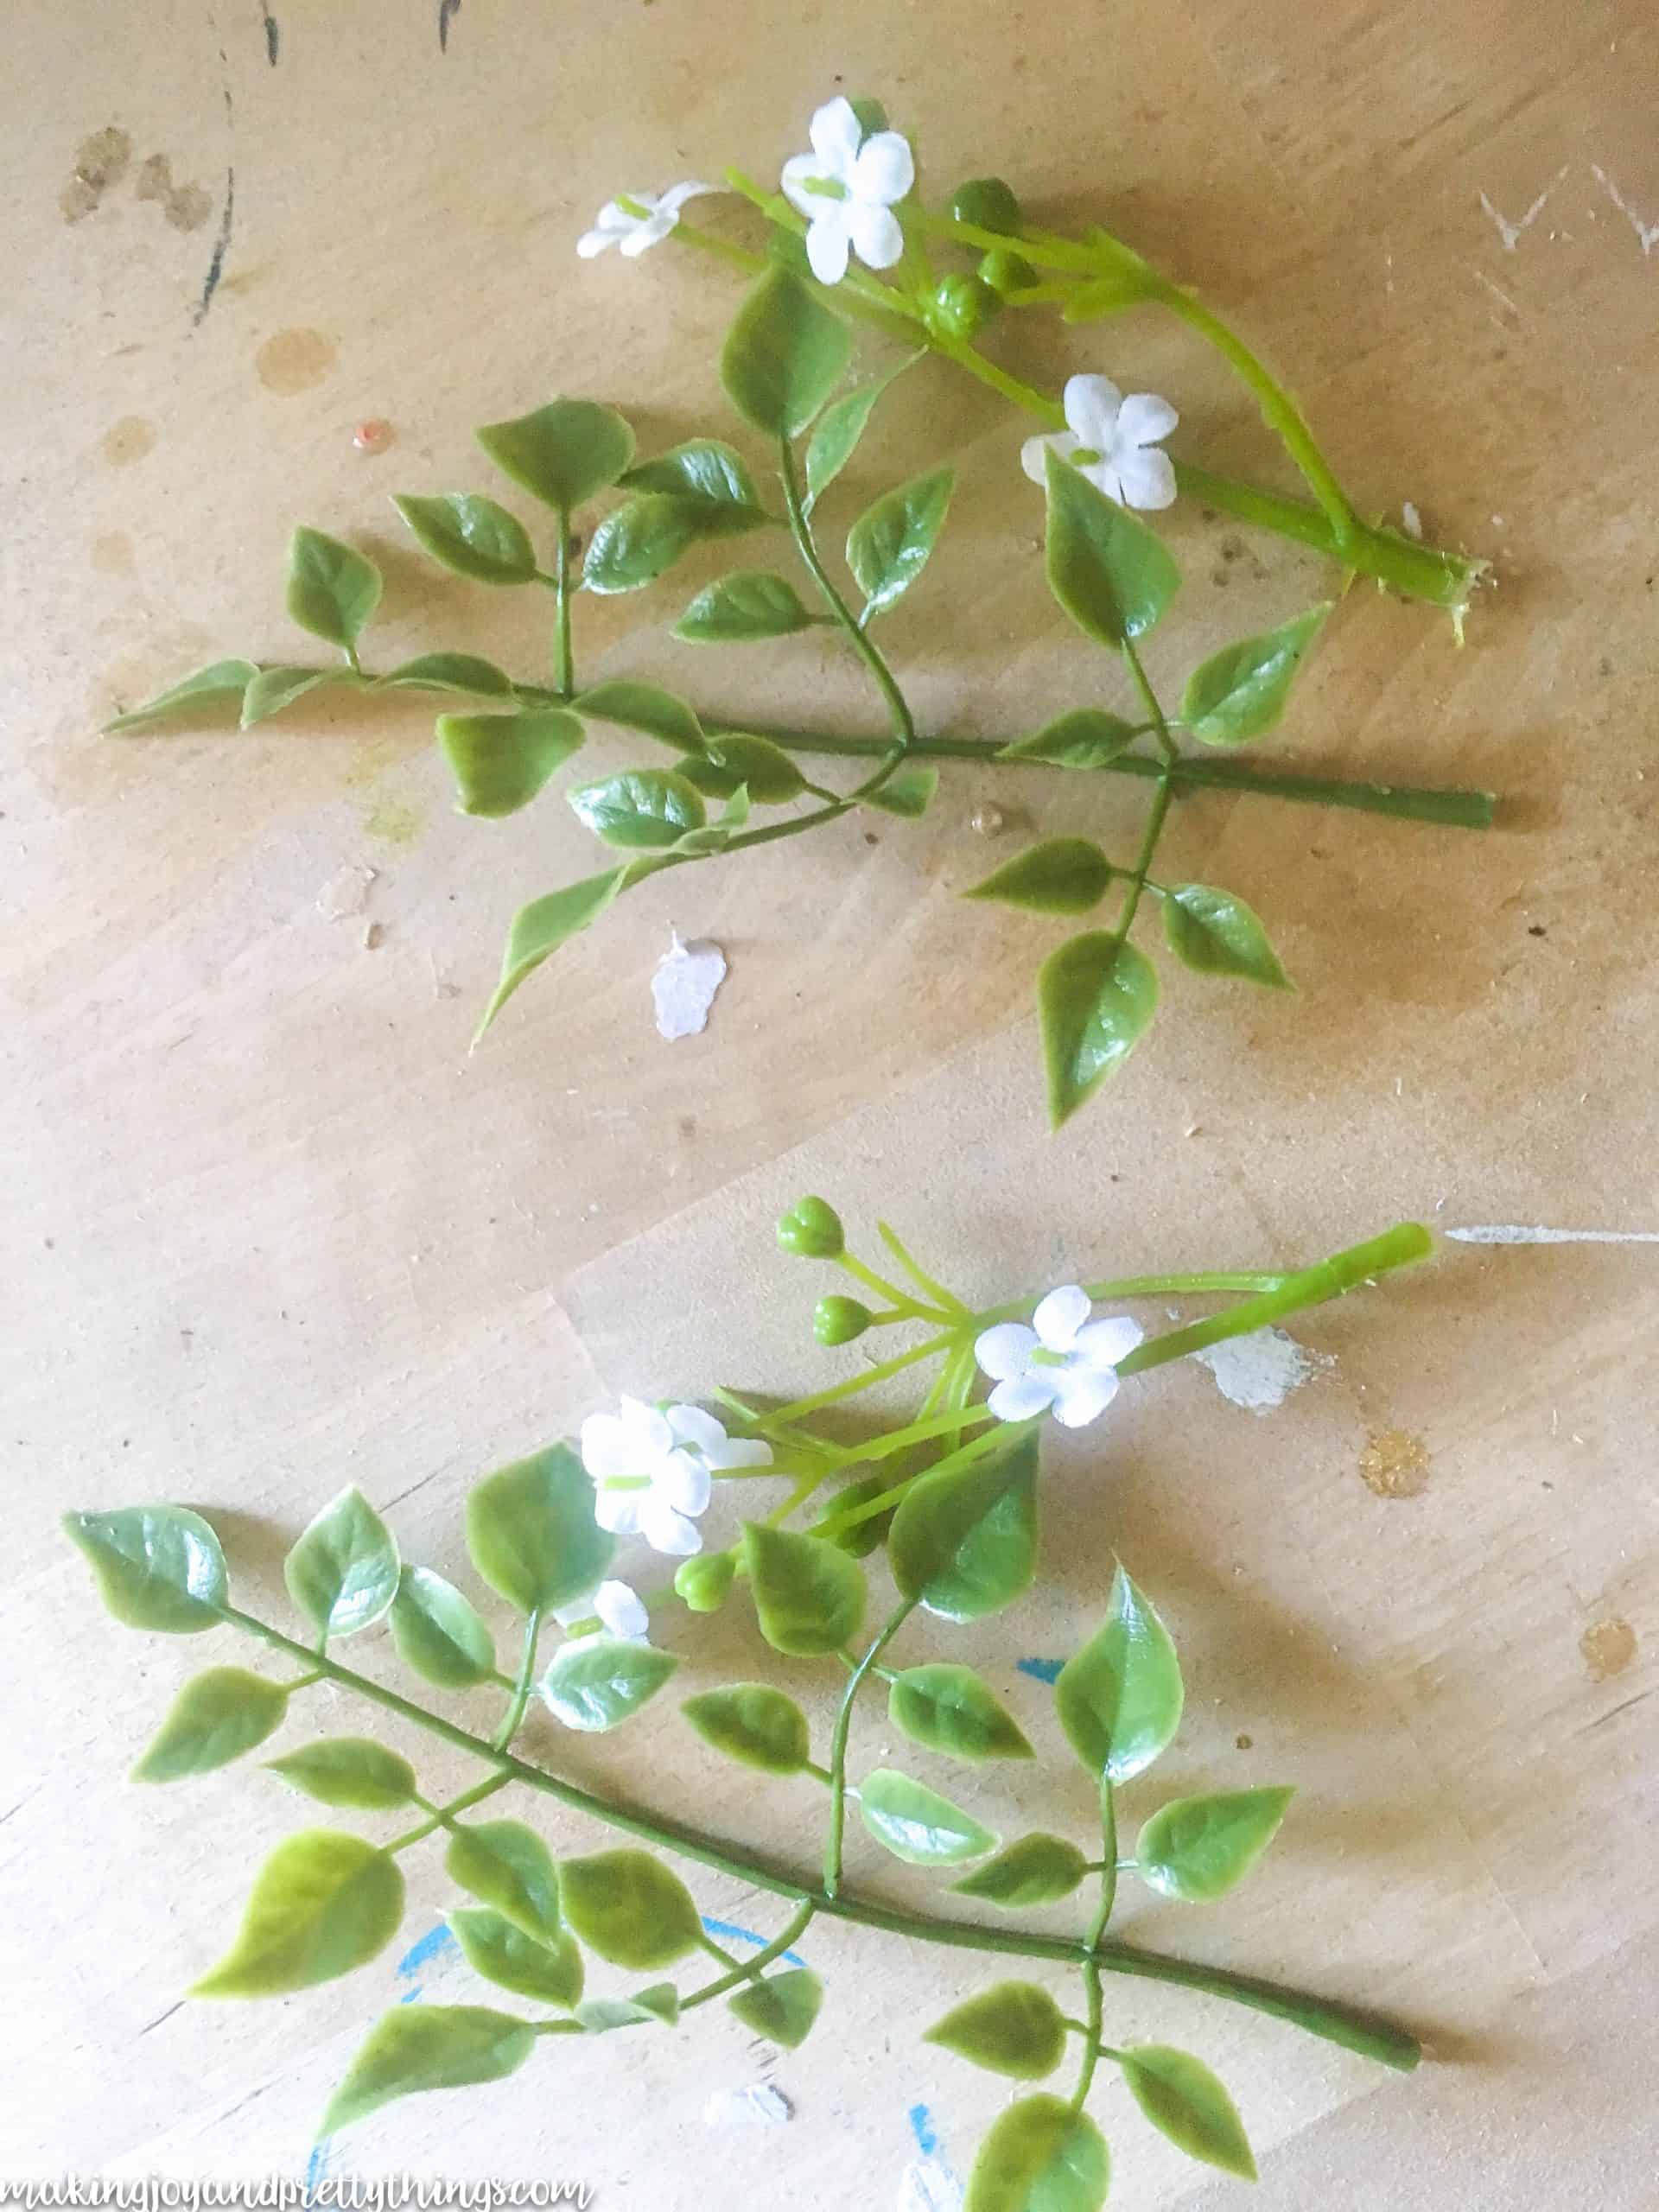 Small sprigs of faux greenery and baby's breath flowers sit on a wooden work table.